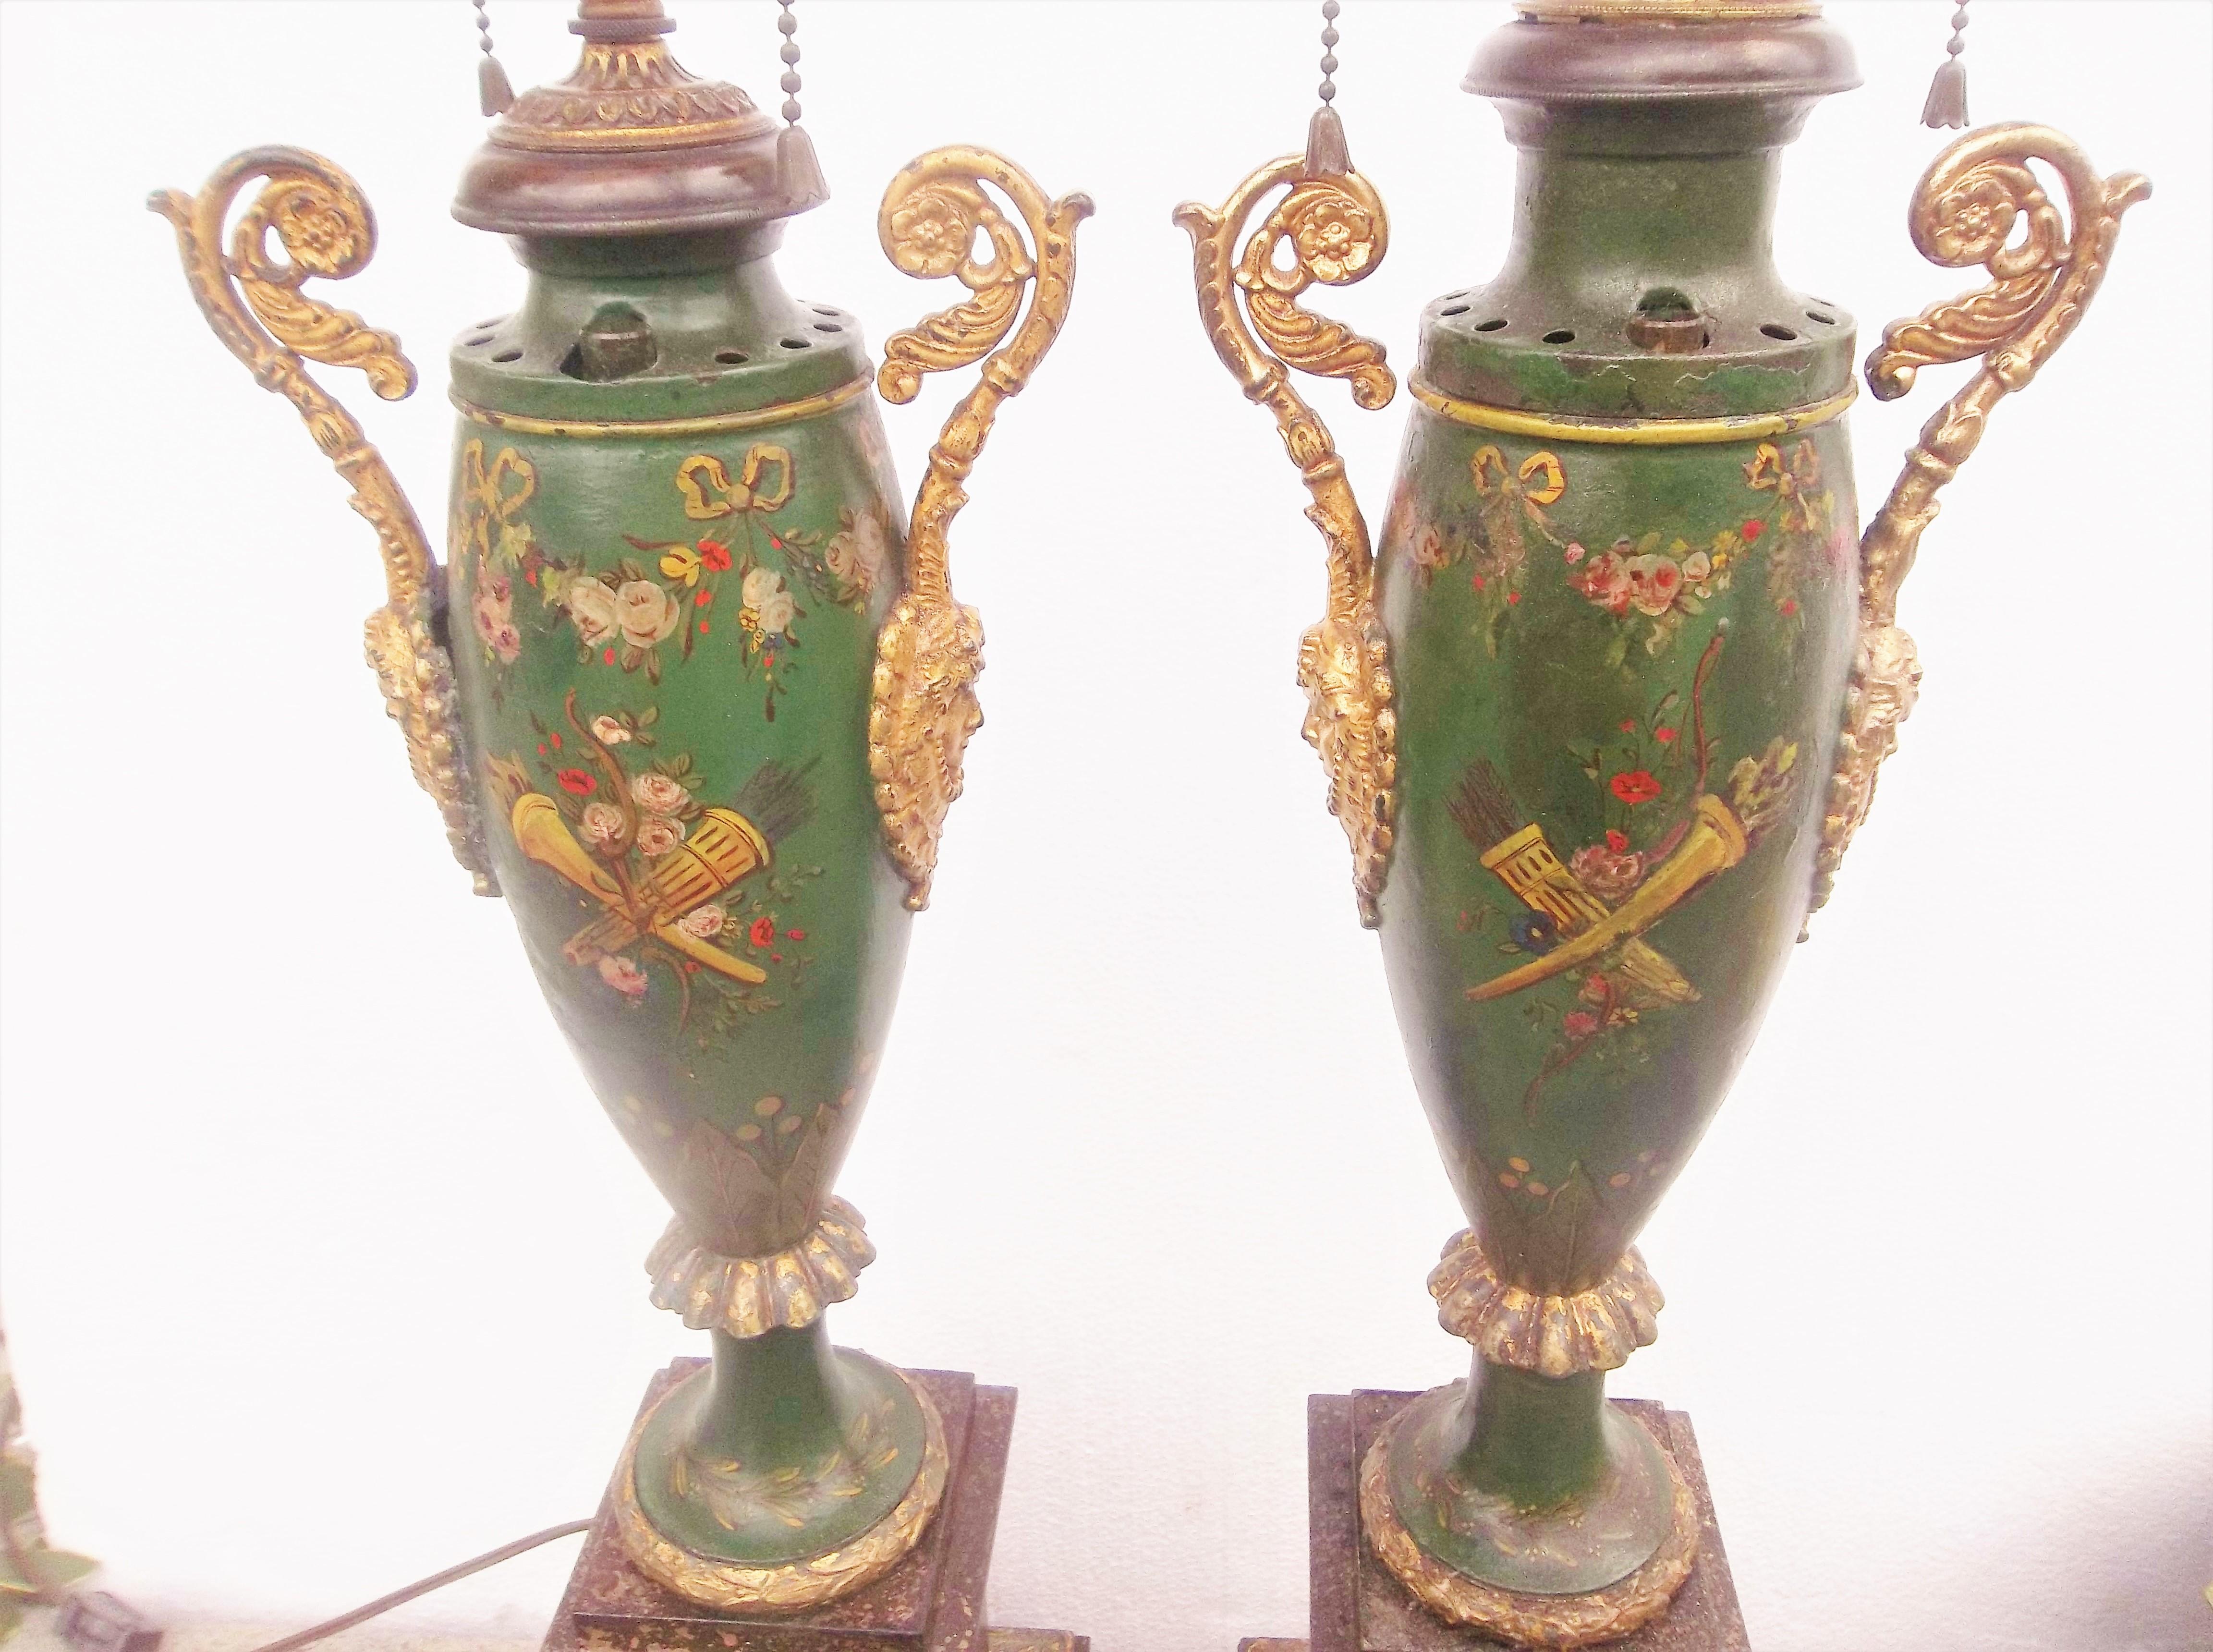 The shade(s) and bases(s) in a faux porphyry finish with gilt decorations of baskets, laurels, festoons and wreaths. Each parfum with a green ground and decorated with floral garlands, bow and arrows and torches. The gilded handles on the lamp each